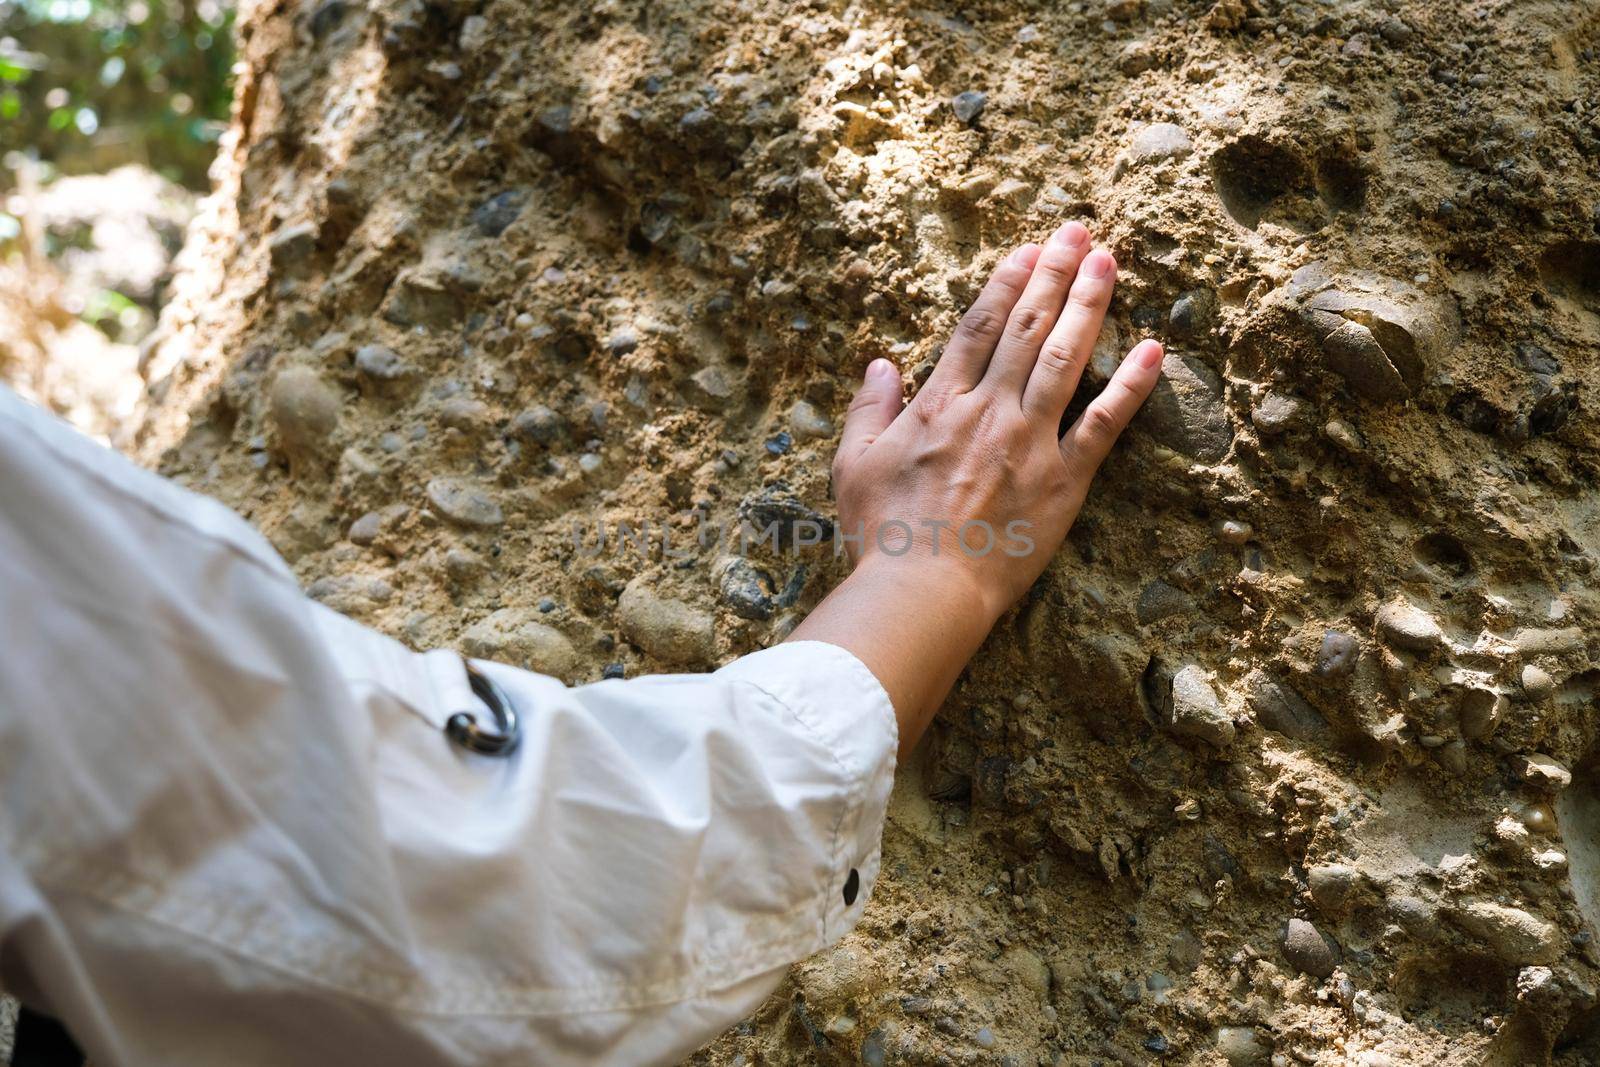 Asian female geologist researcher touches rocks by hand to analyze surface in Mae Wang Natural Park, Thailand. Exploration Geologist in the Field by TEERASAK